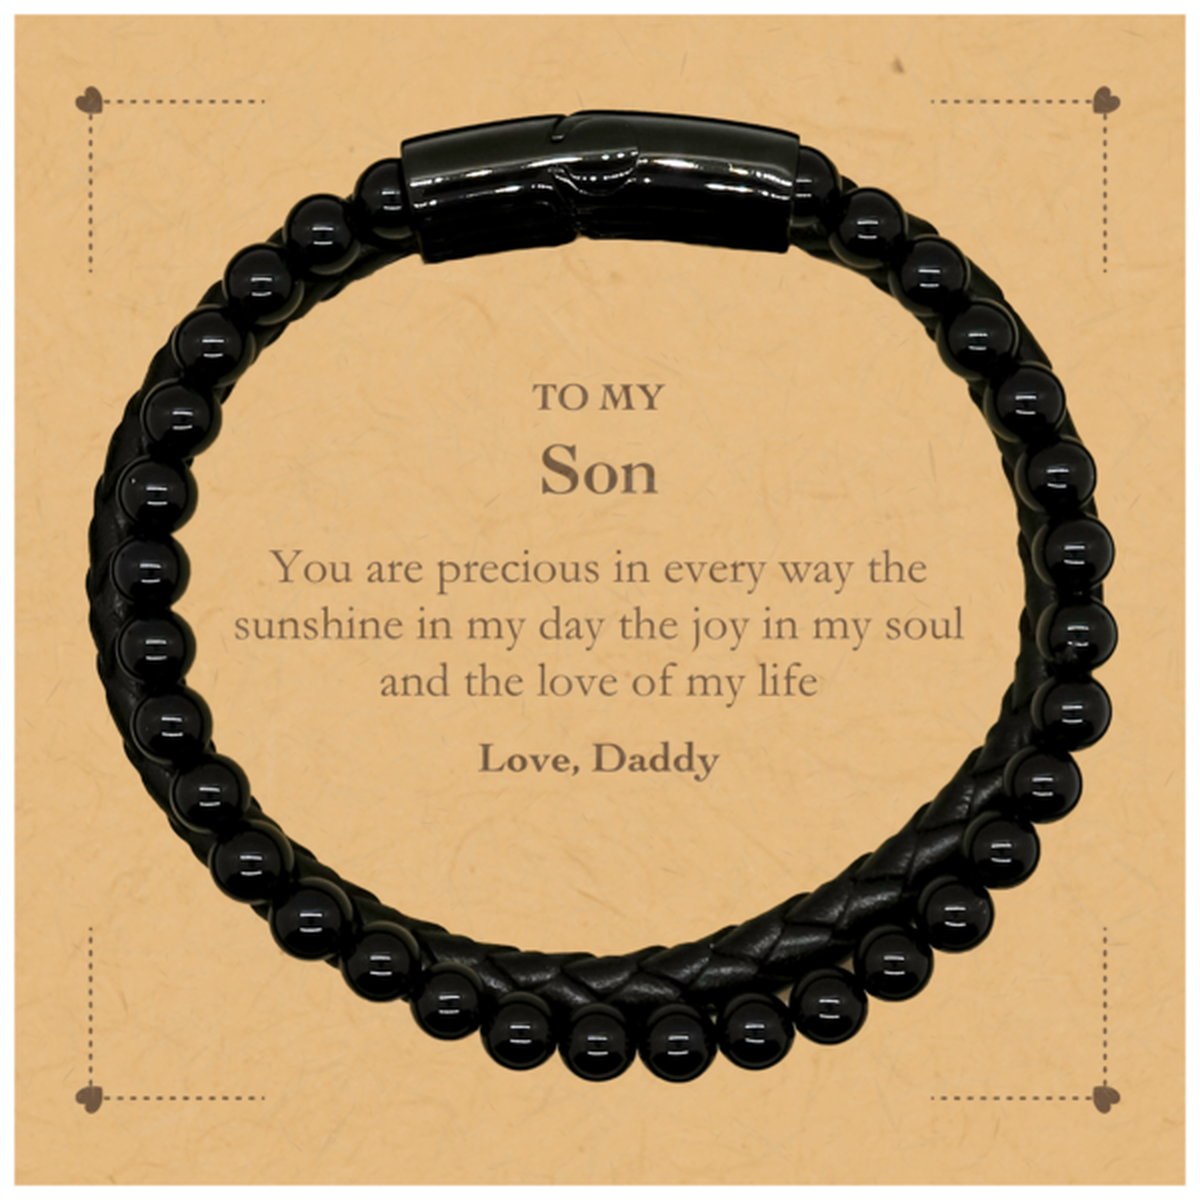 Graduation Gifts for Son Stone Leather Bracelets Present from Daddy, Christmas Son Birthday Gifts Son You are precious in every way the sunshine in my day. Love, Daddy